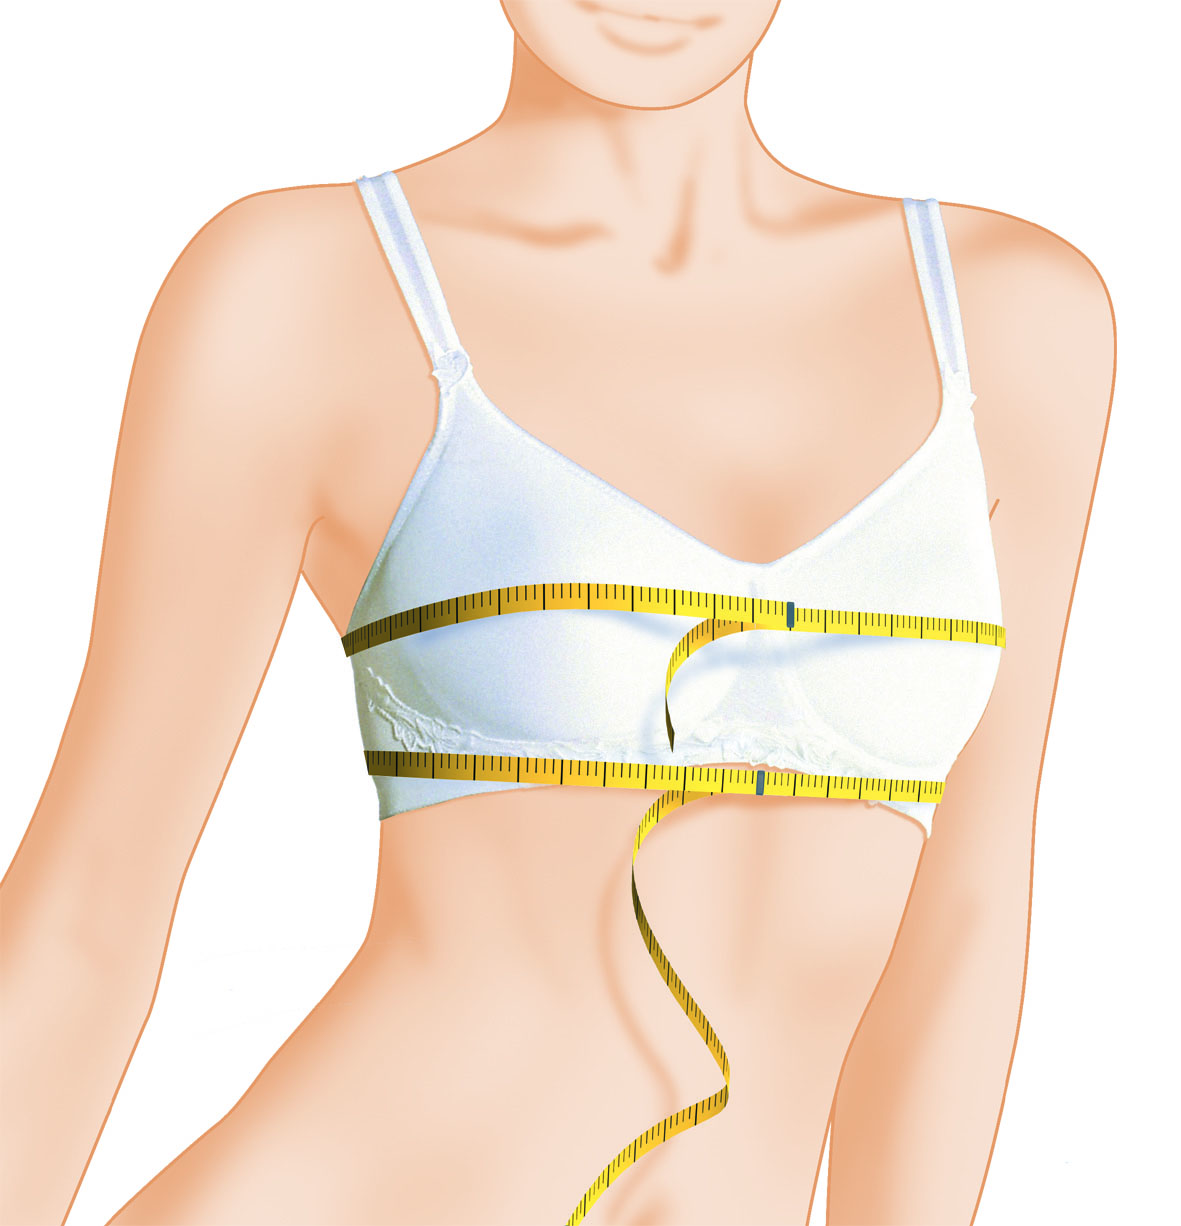 How To Correctly Measure For Your Bra – Dianne's Mastectomy